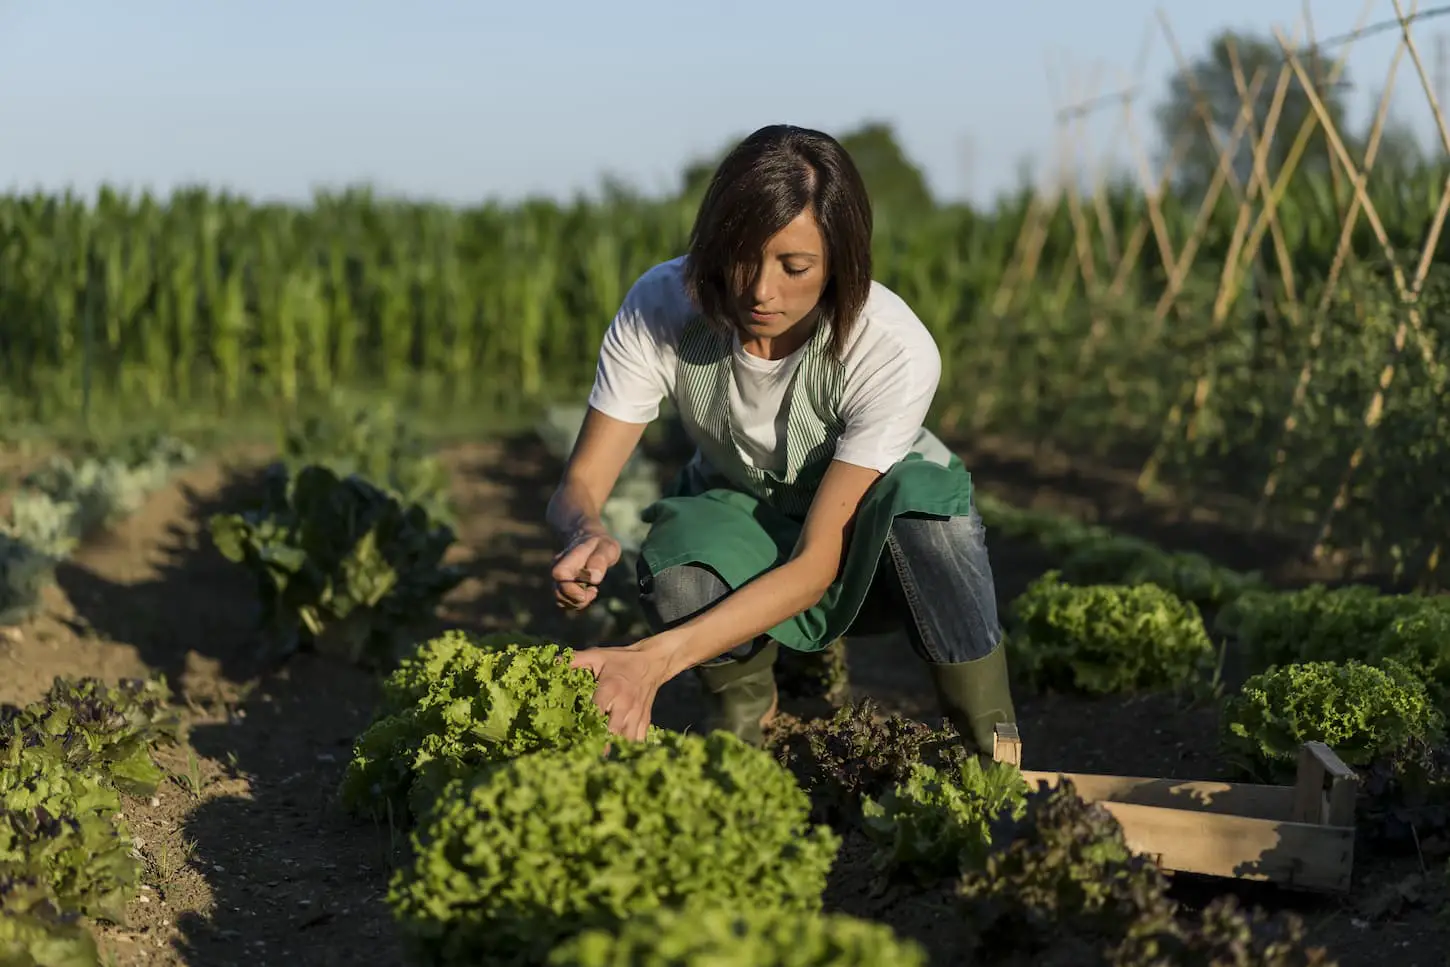 An image of a woman working in her vegetable garden.